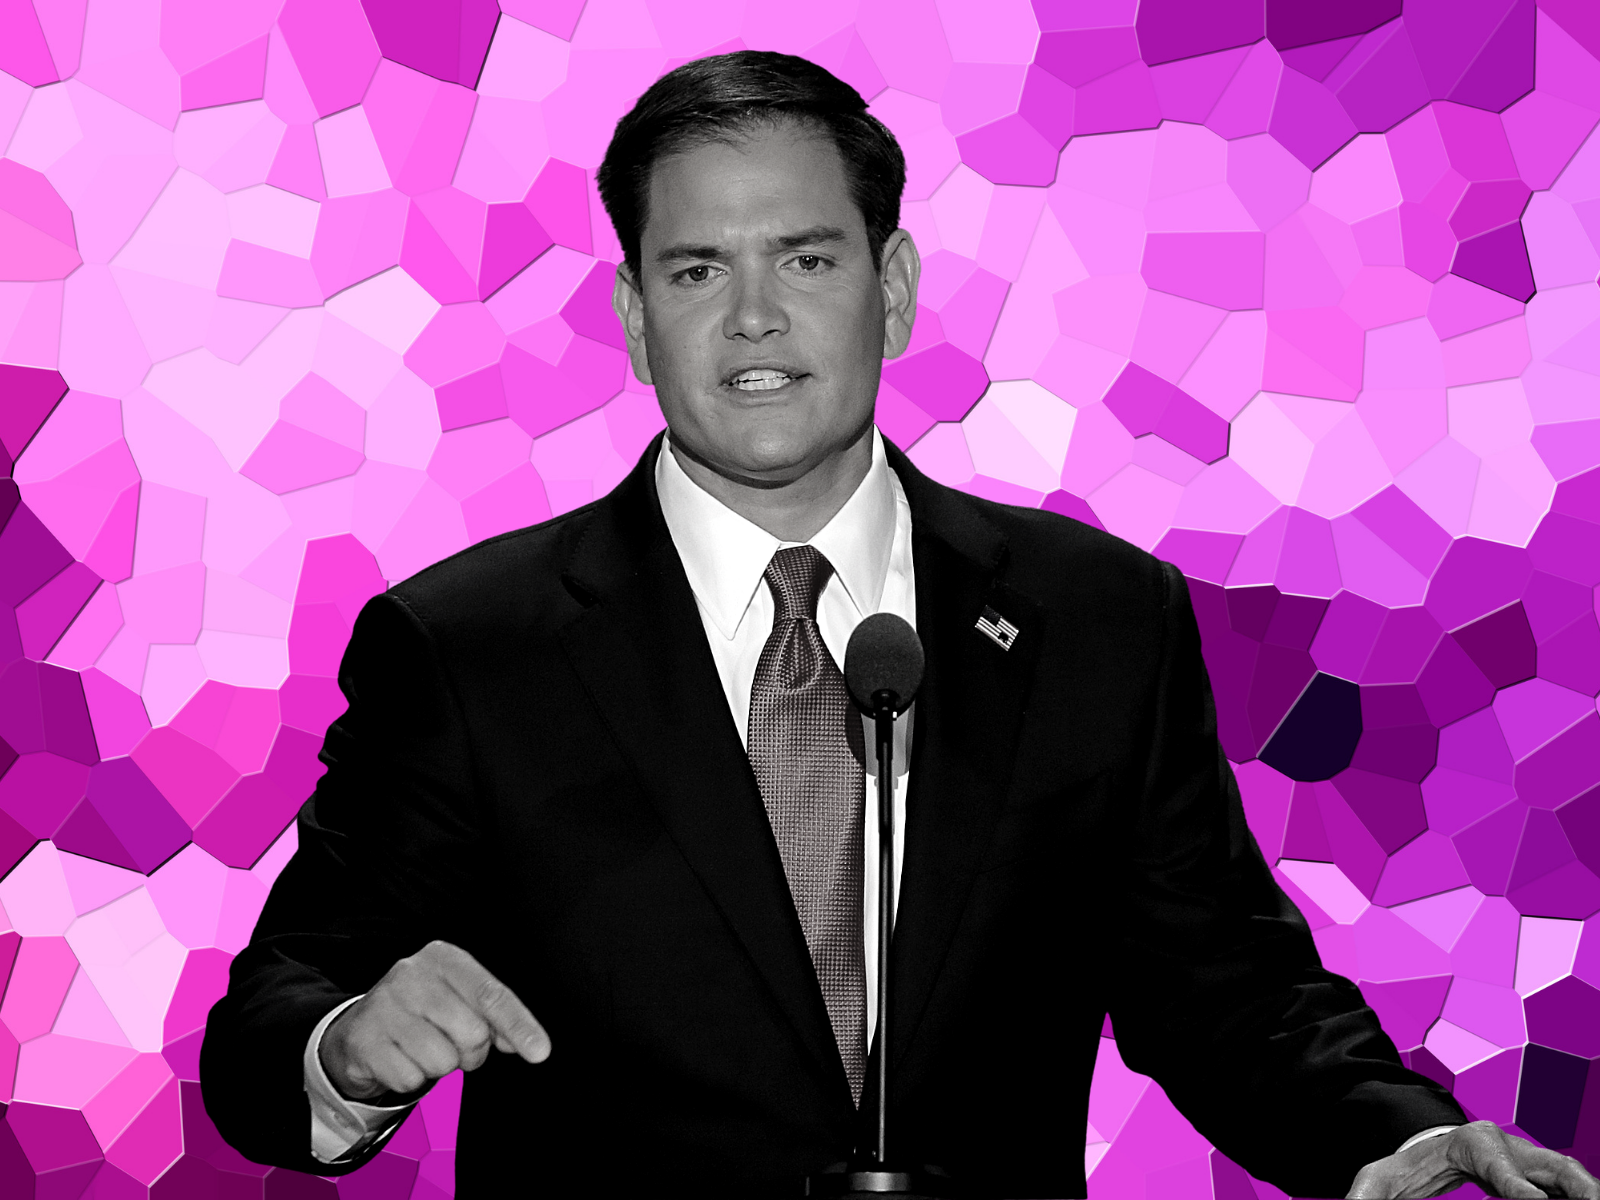 Marco Rubio addresses VP rejection in comments to Florida GOP